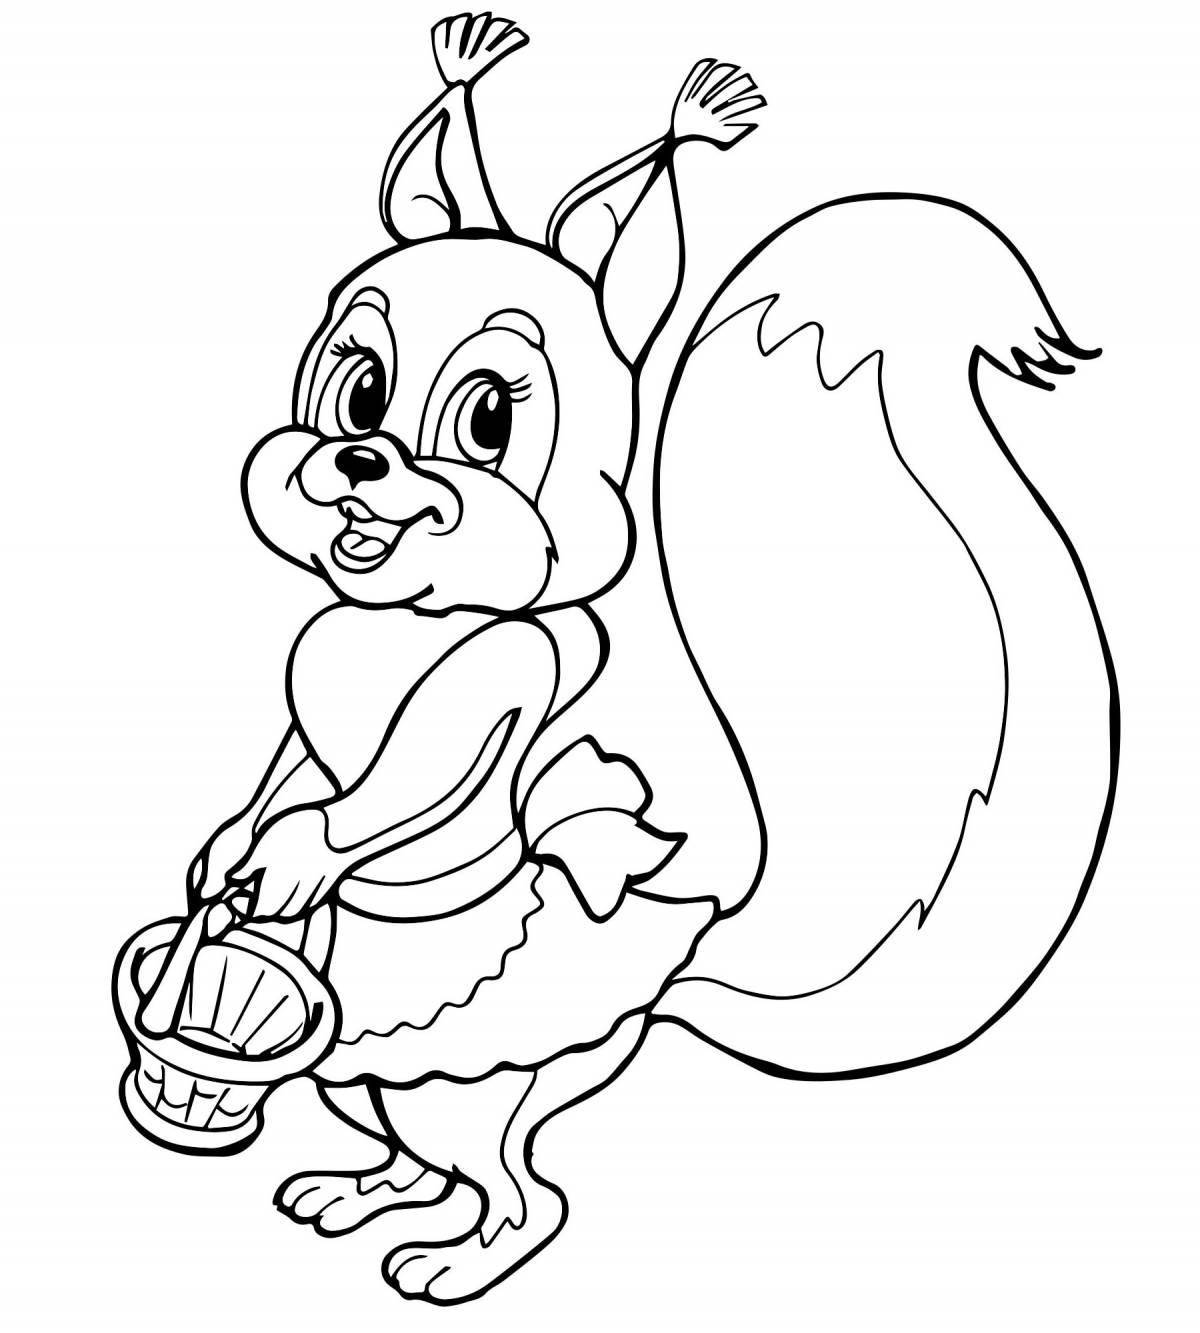 Gorgeous squirrel coloring page